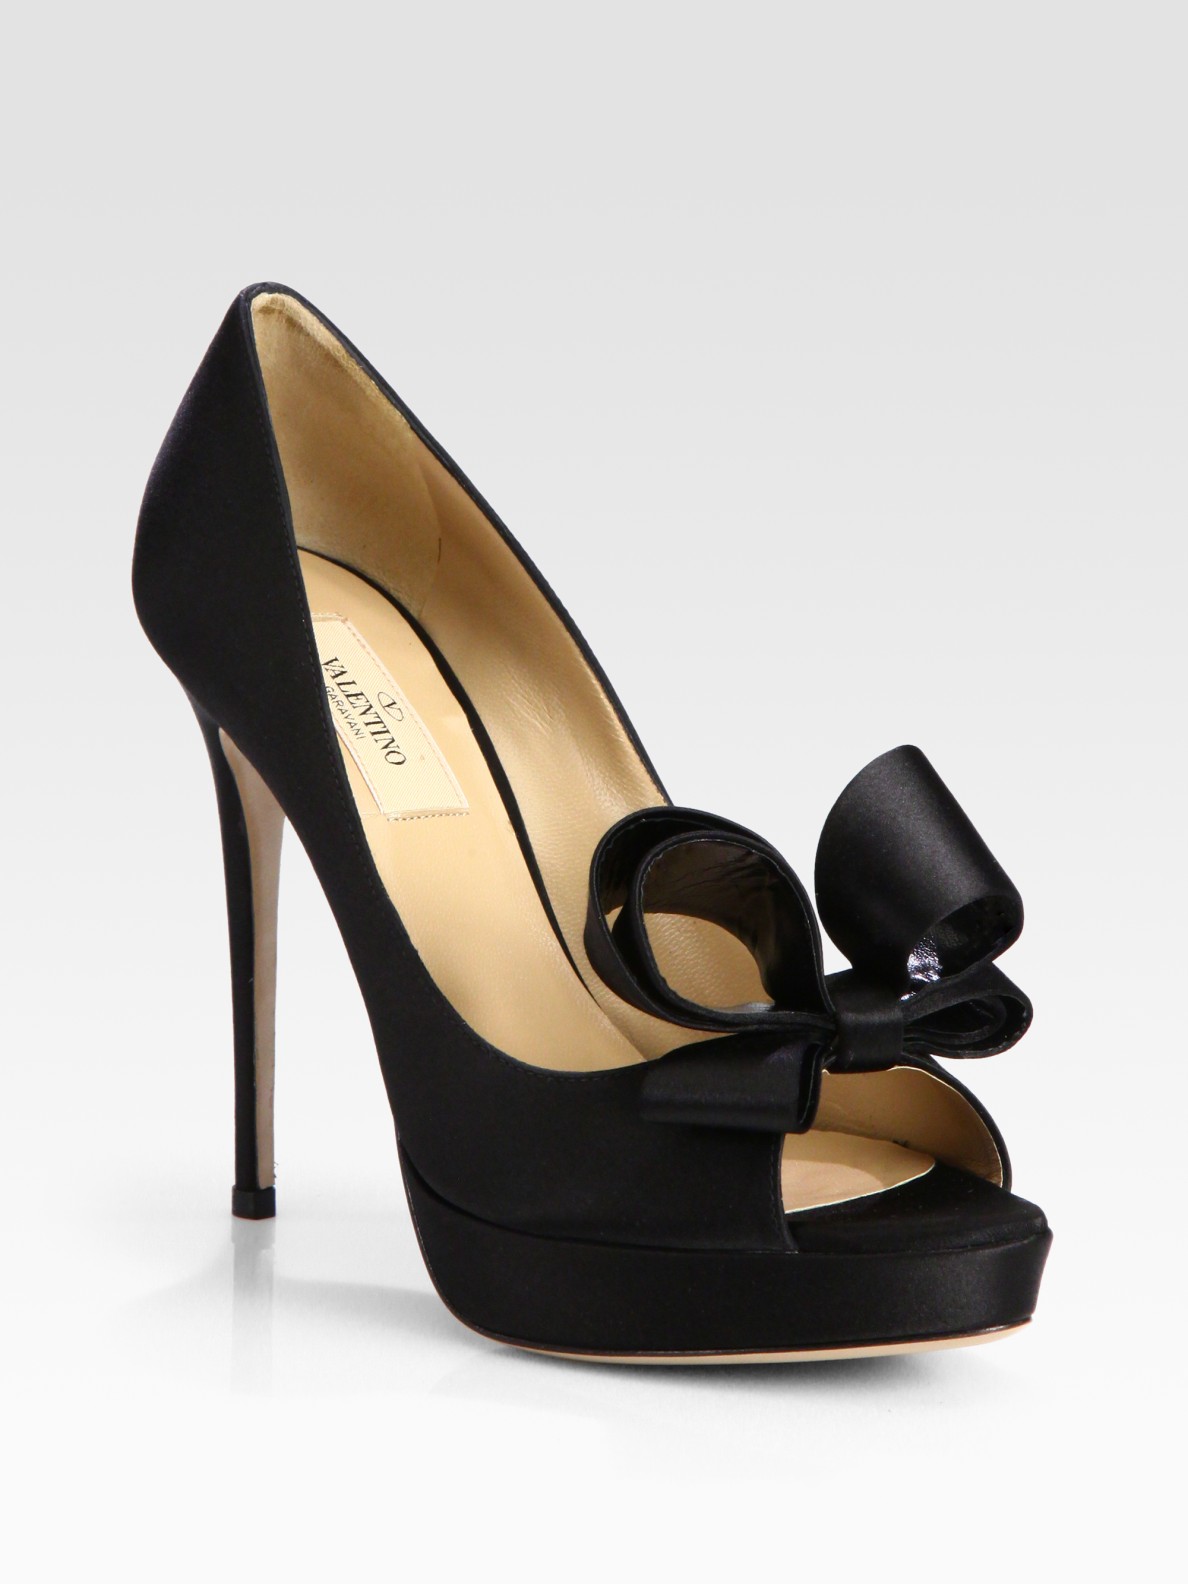 Lyst - Valentino Satin Couture Bow Pumps in Black